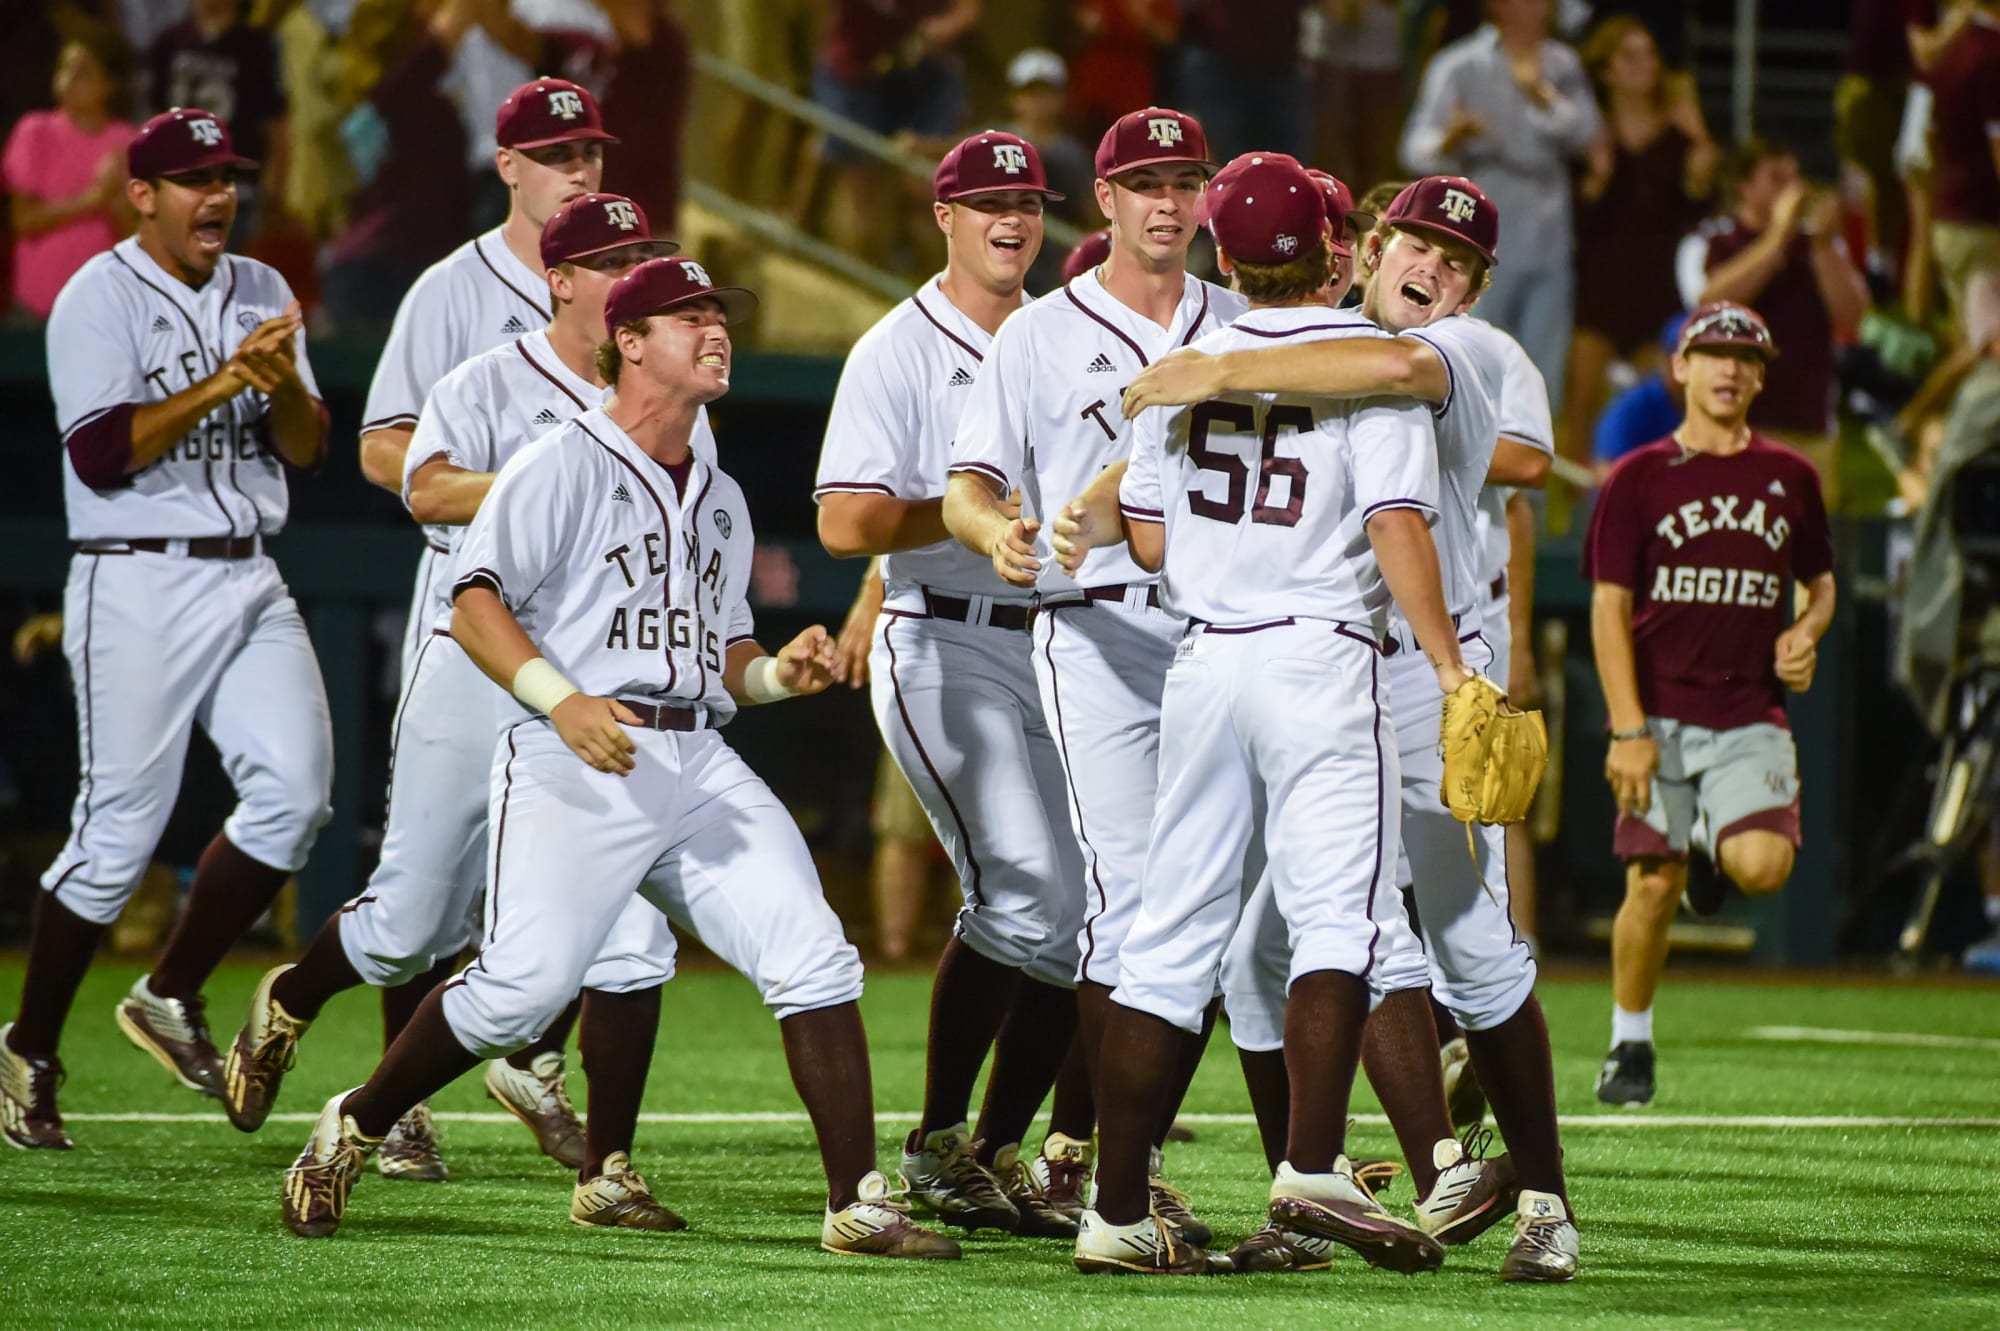 Texas A&M Baseball Aggies move up in polls after No. 1 Vandy series